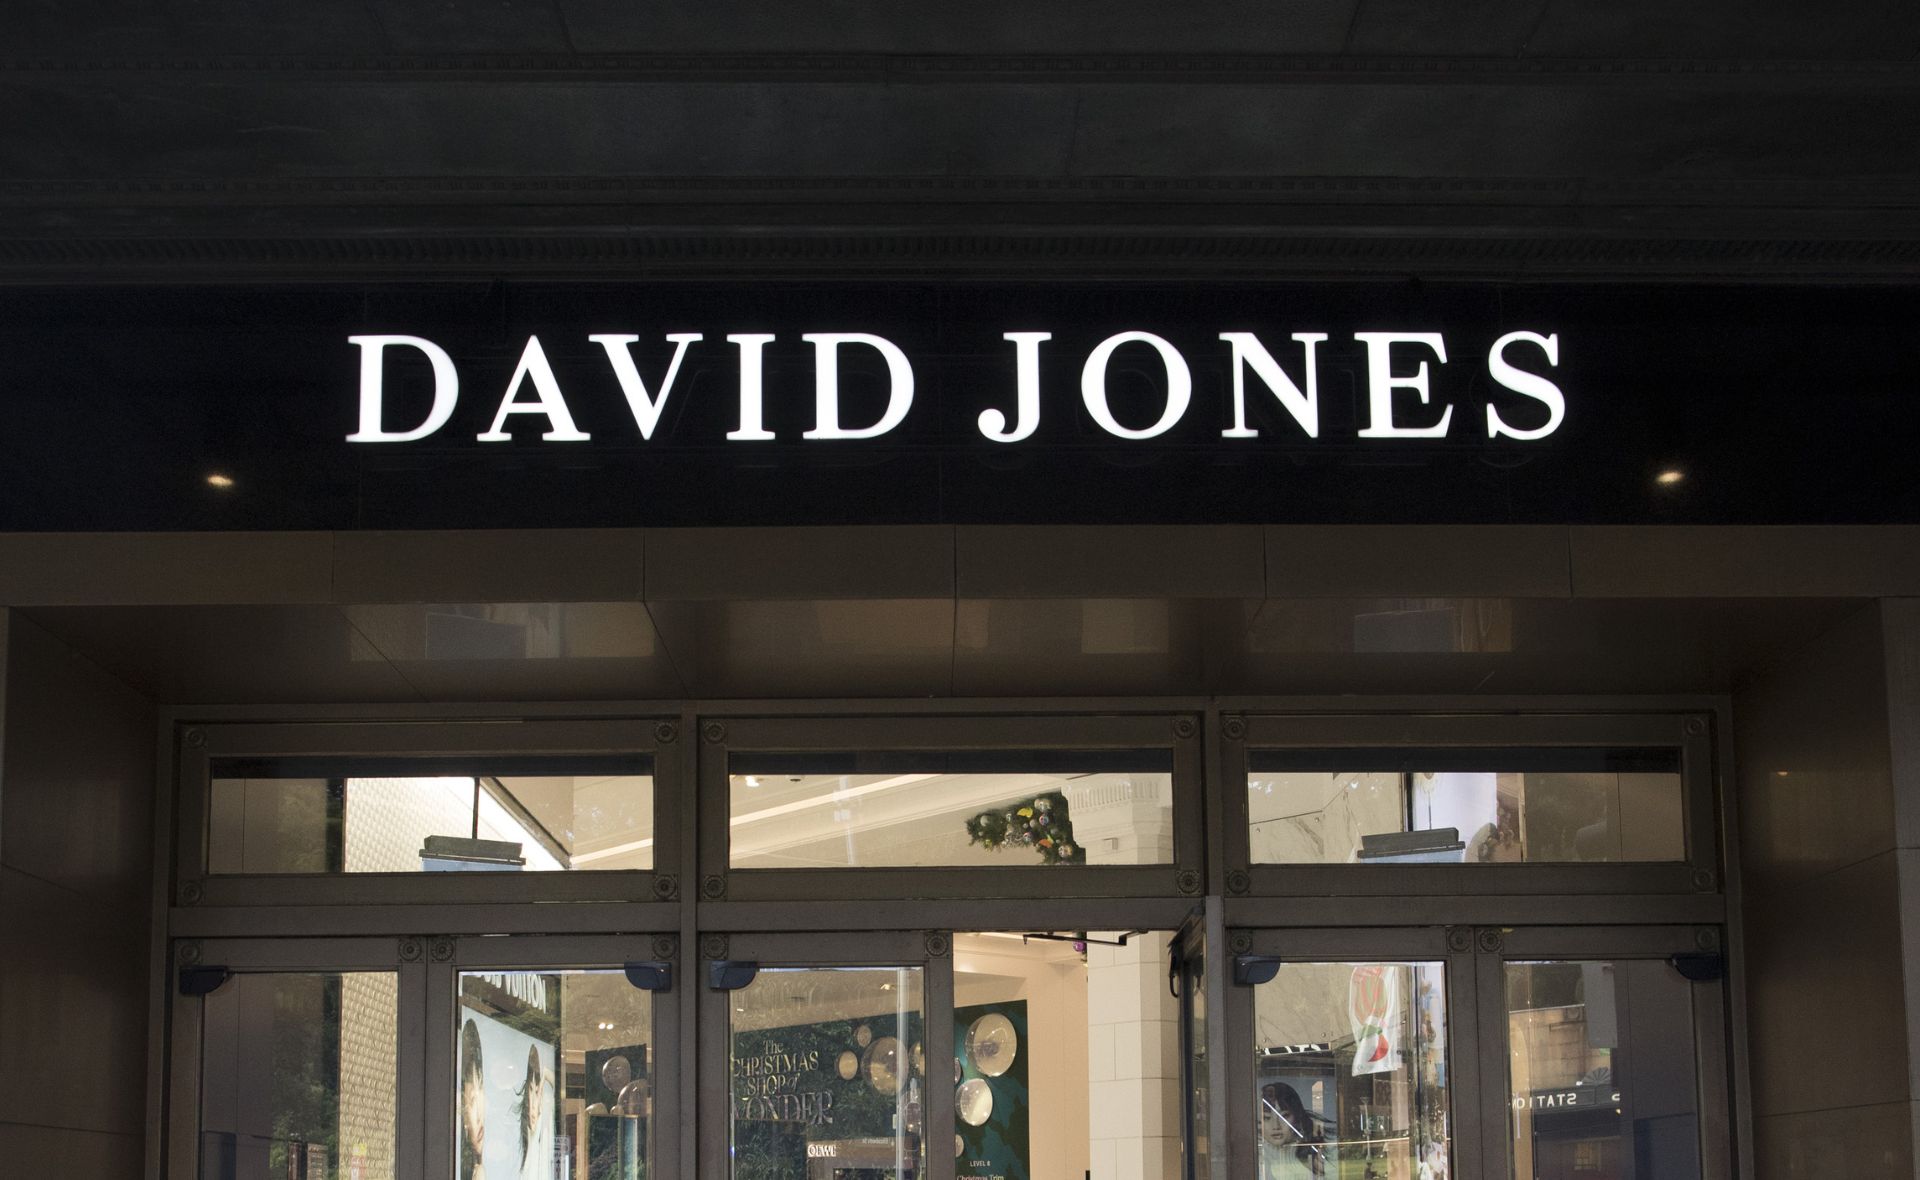 You’ll want to jump on David Jones’ Boxing Day sales